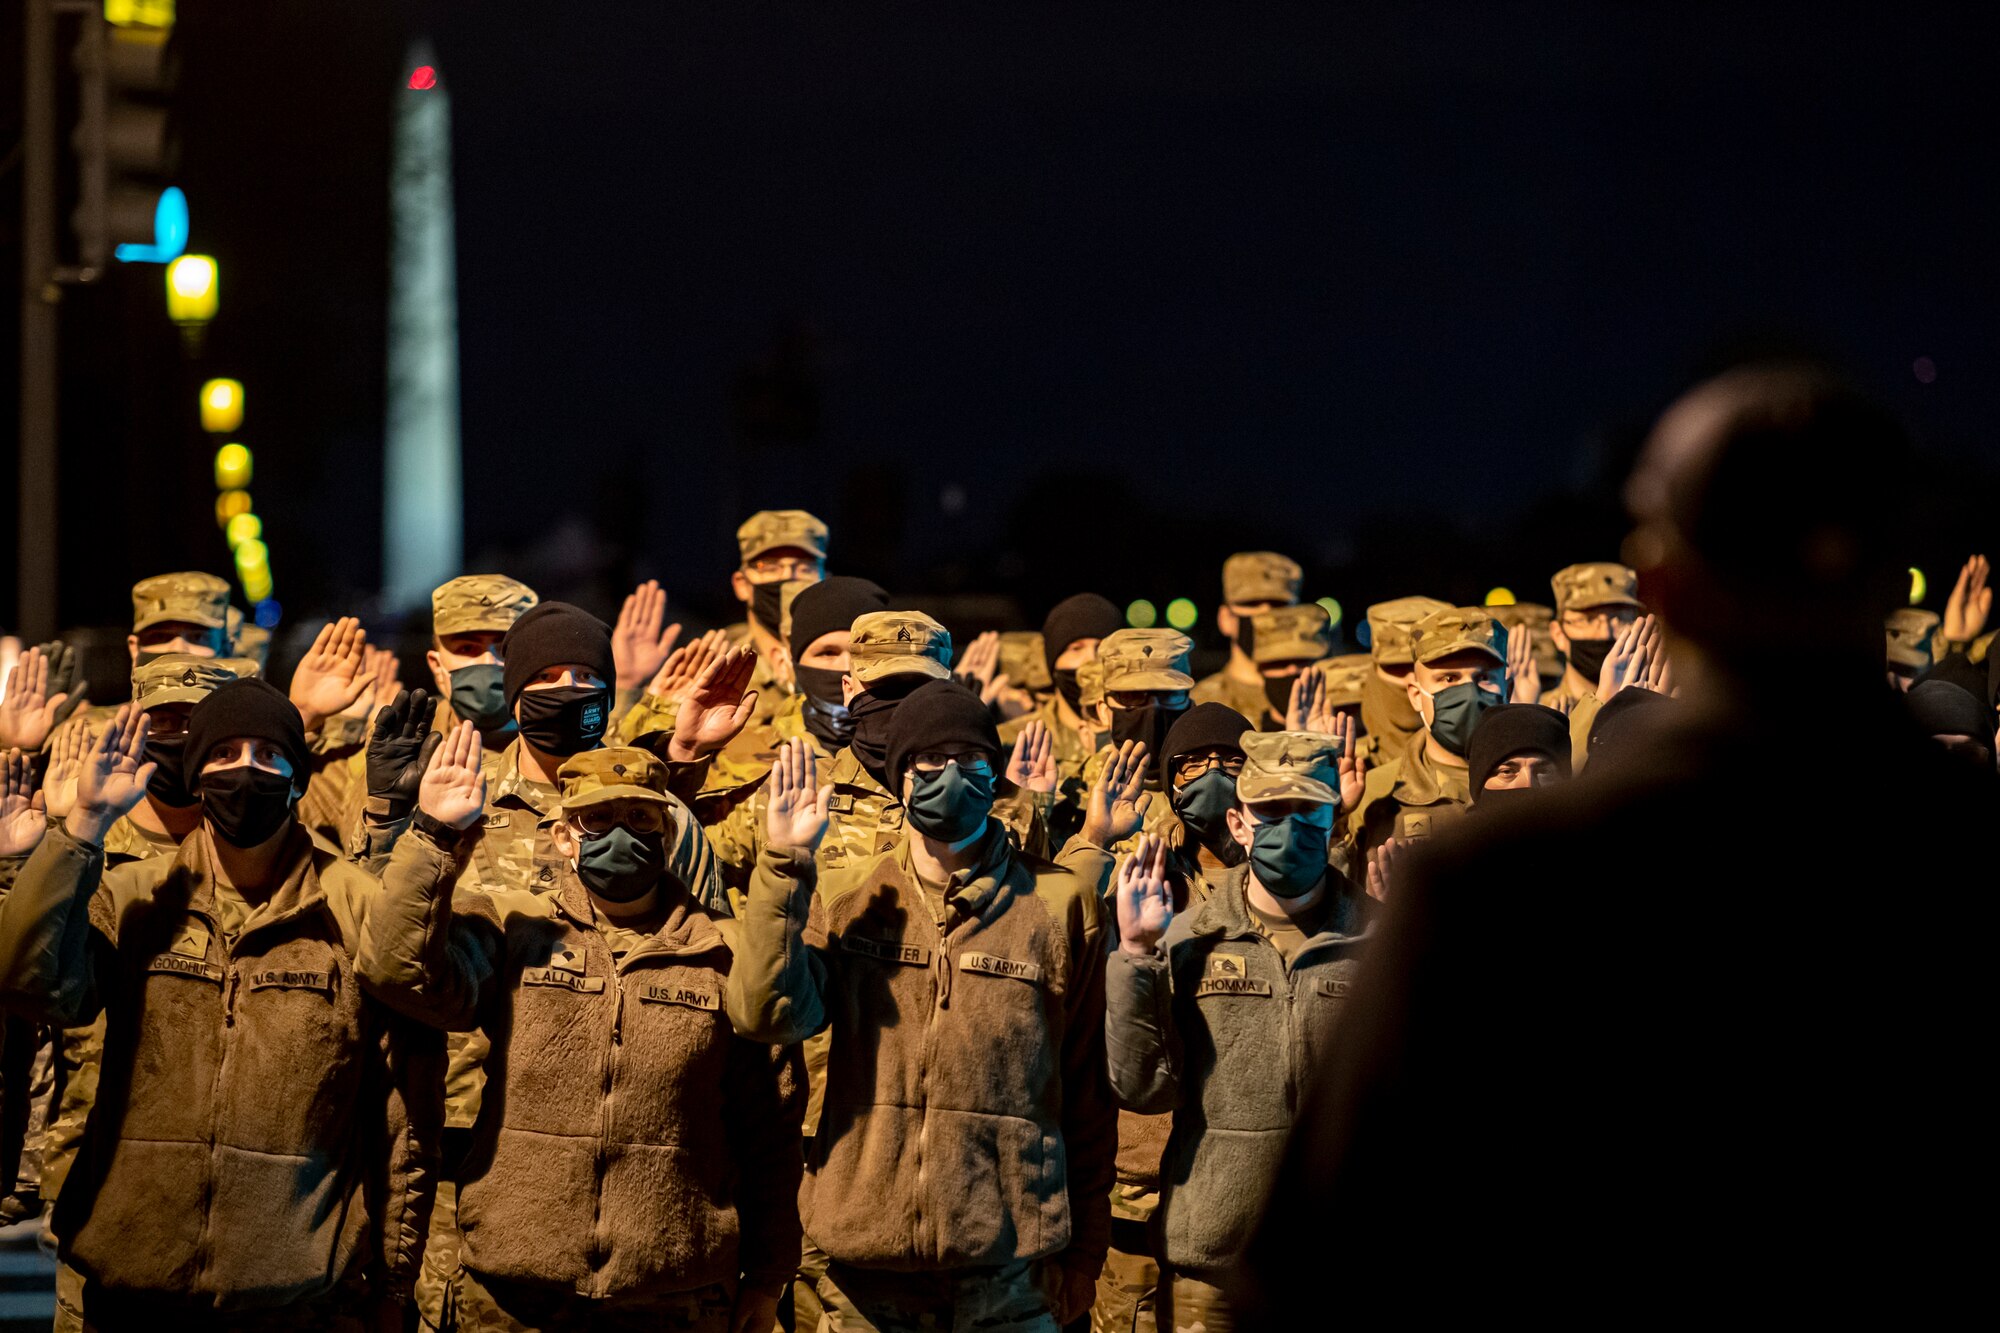 Chief Deputy U.S. Marshal for the District of Columbia Lamont Ruffin deputizes nearly 2,000 National Guard Soldiers and Airmen in Washington, D.C., Jan. 17, 2021. National Guard Soldiers and Airmen from every state and territories supported the 59th Presidential Inauguration.